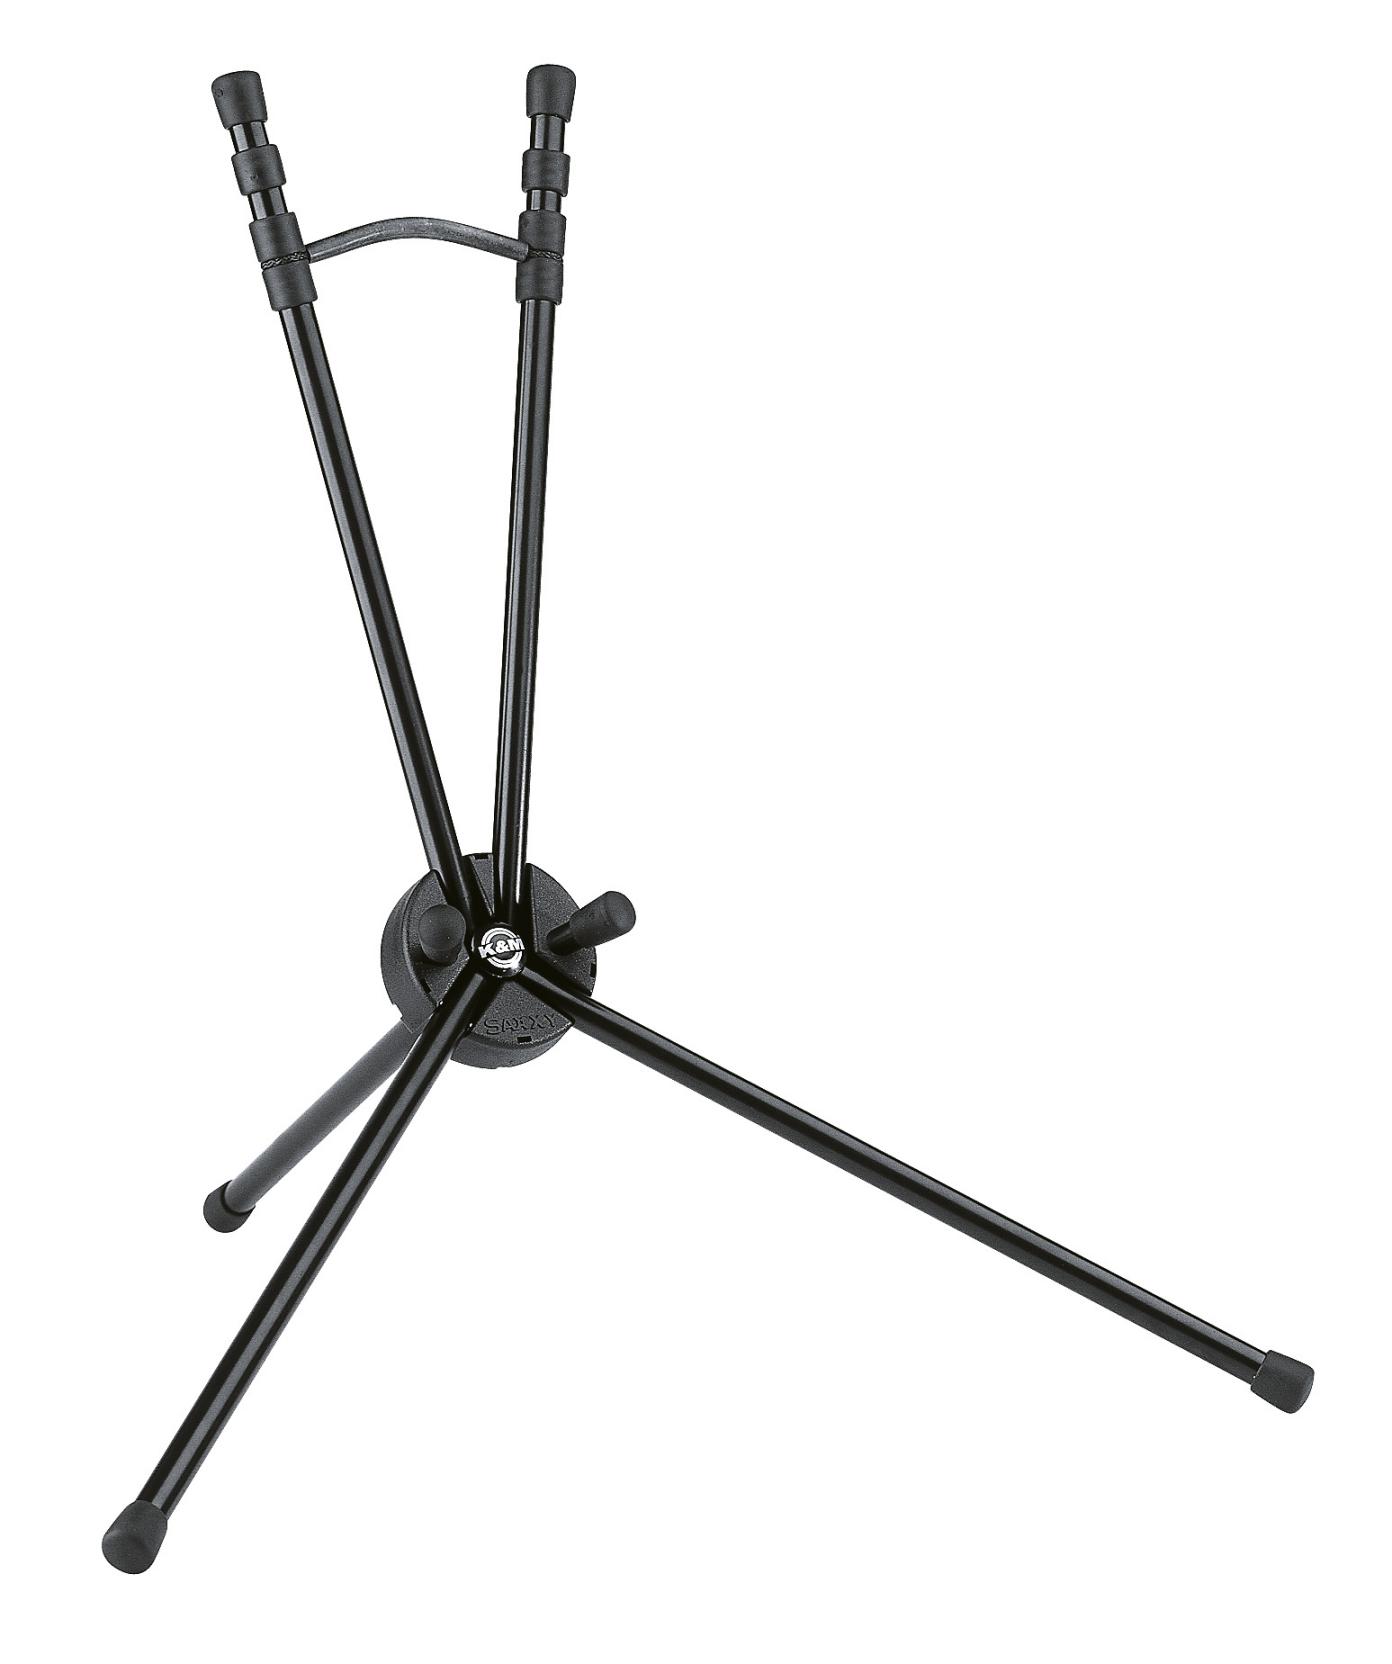 An image of K&M Saxophone Stand Saxxy Tenor Black | PMT Online